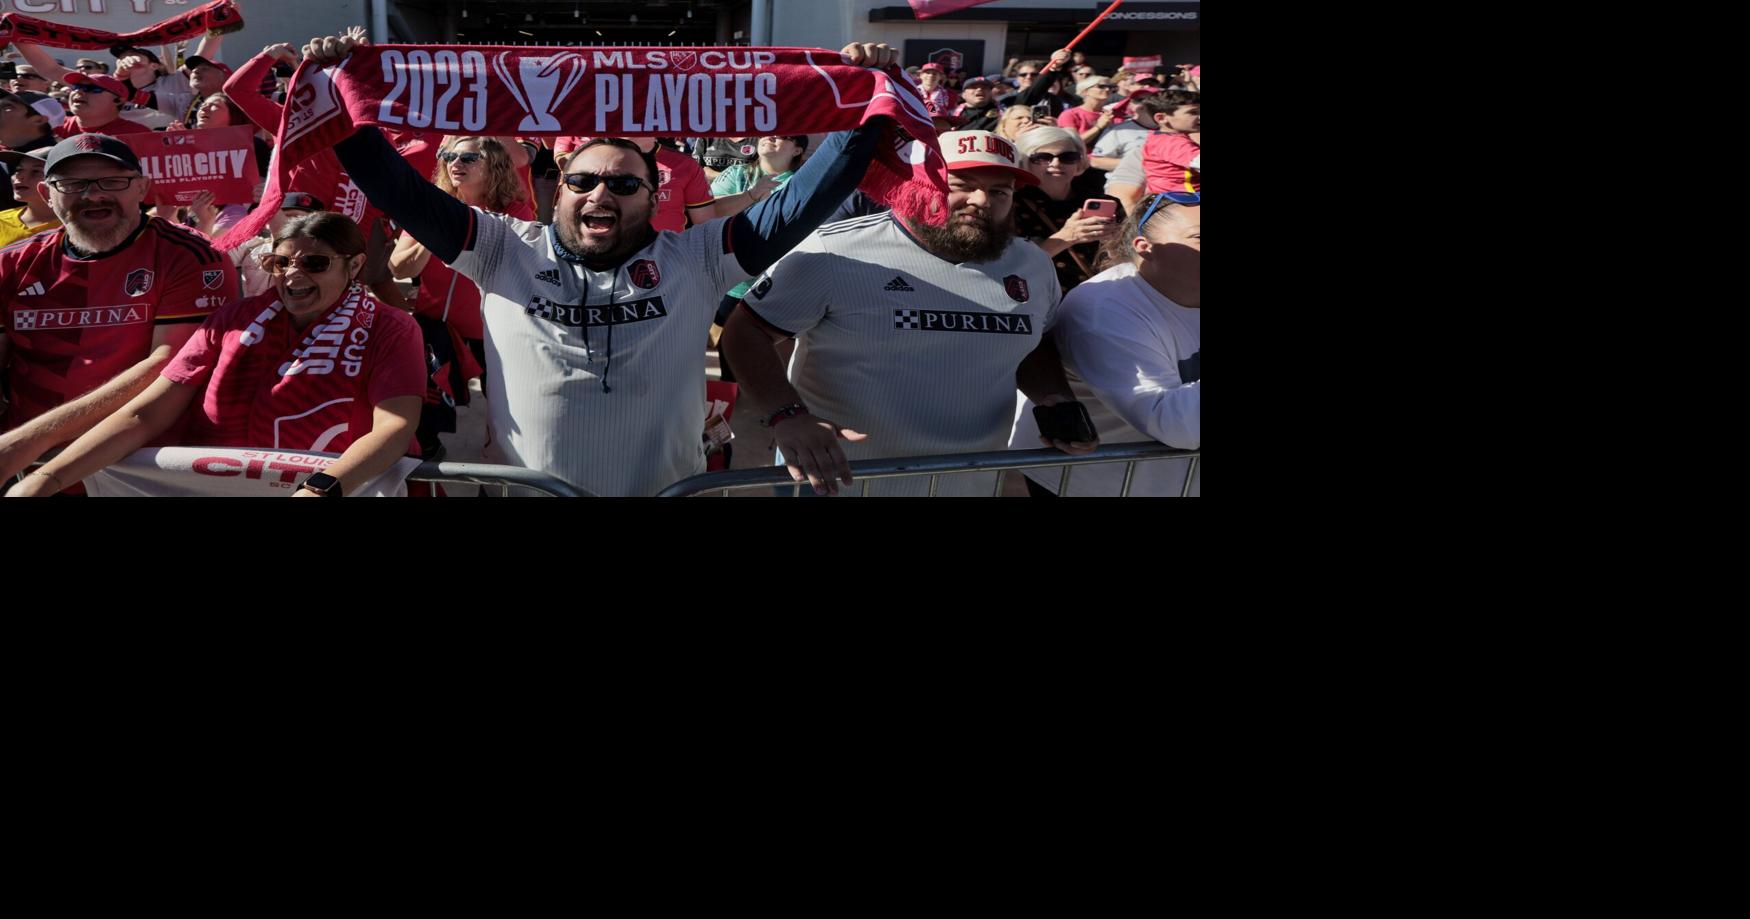 ST. LOUIS, MO - MAY 20: A member of the St. Louis SC supporters